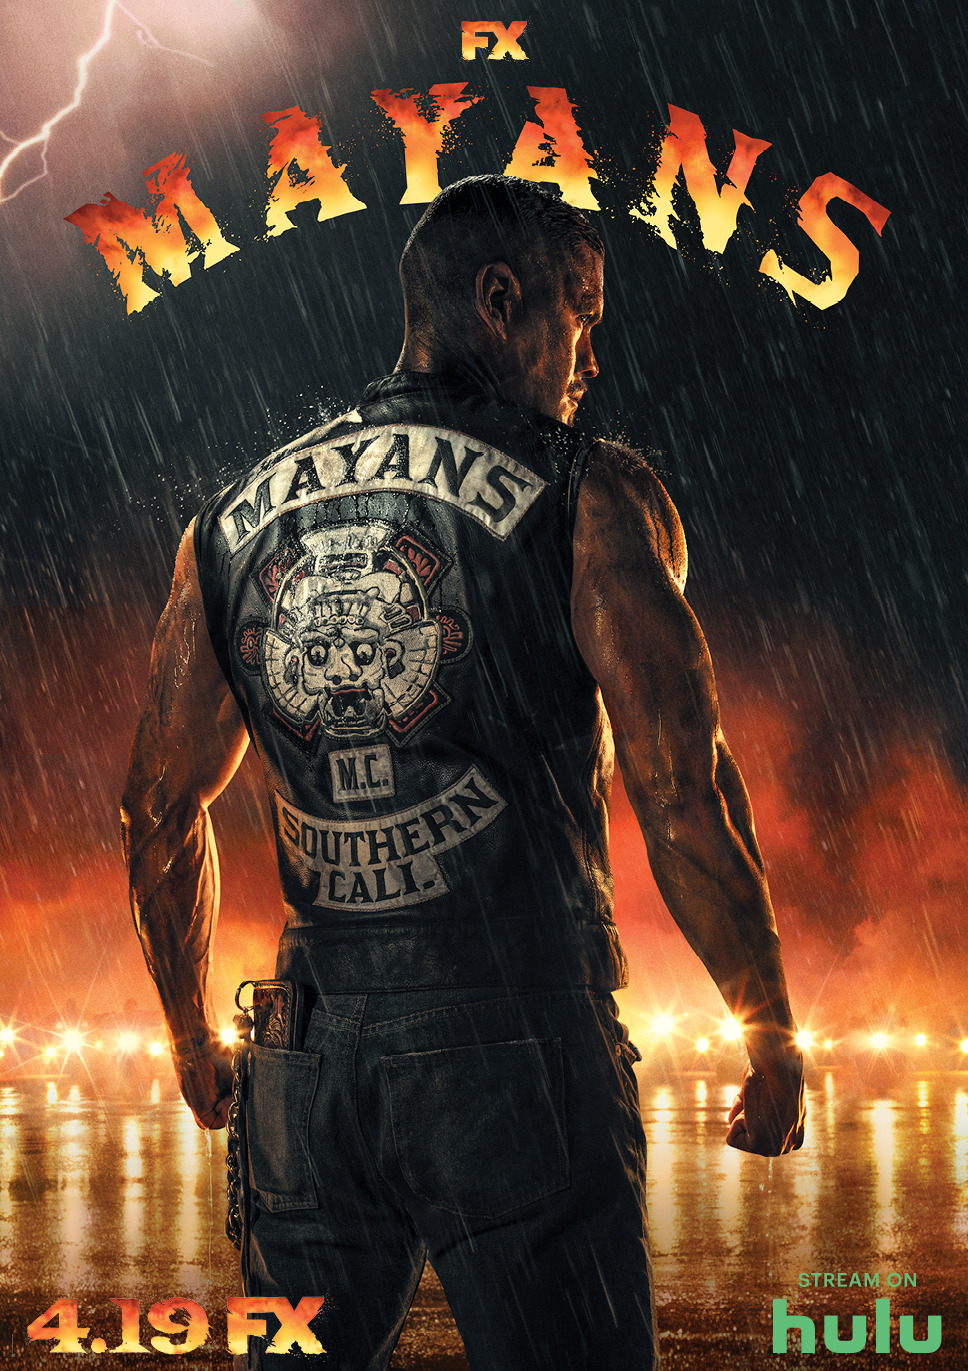 Extra Large TV Poster Image for Mayans M.C. (#13 of 19)